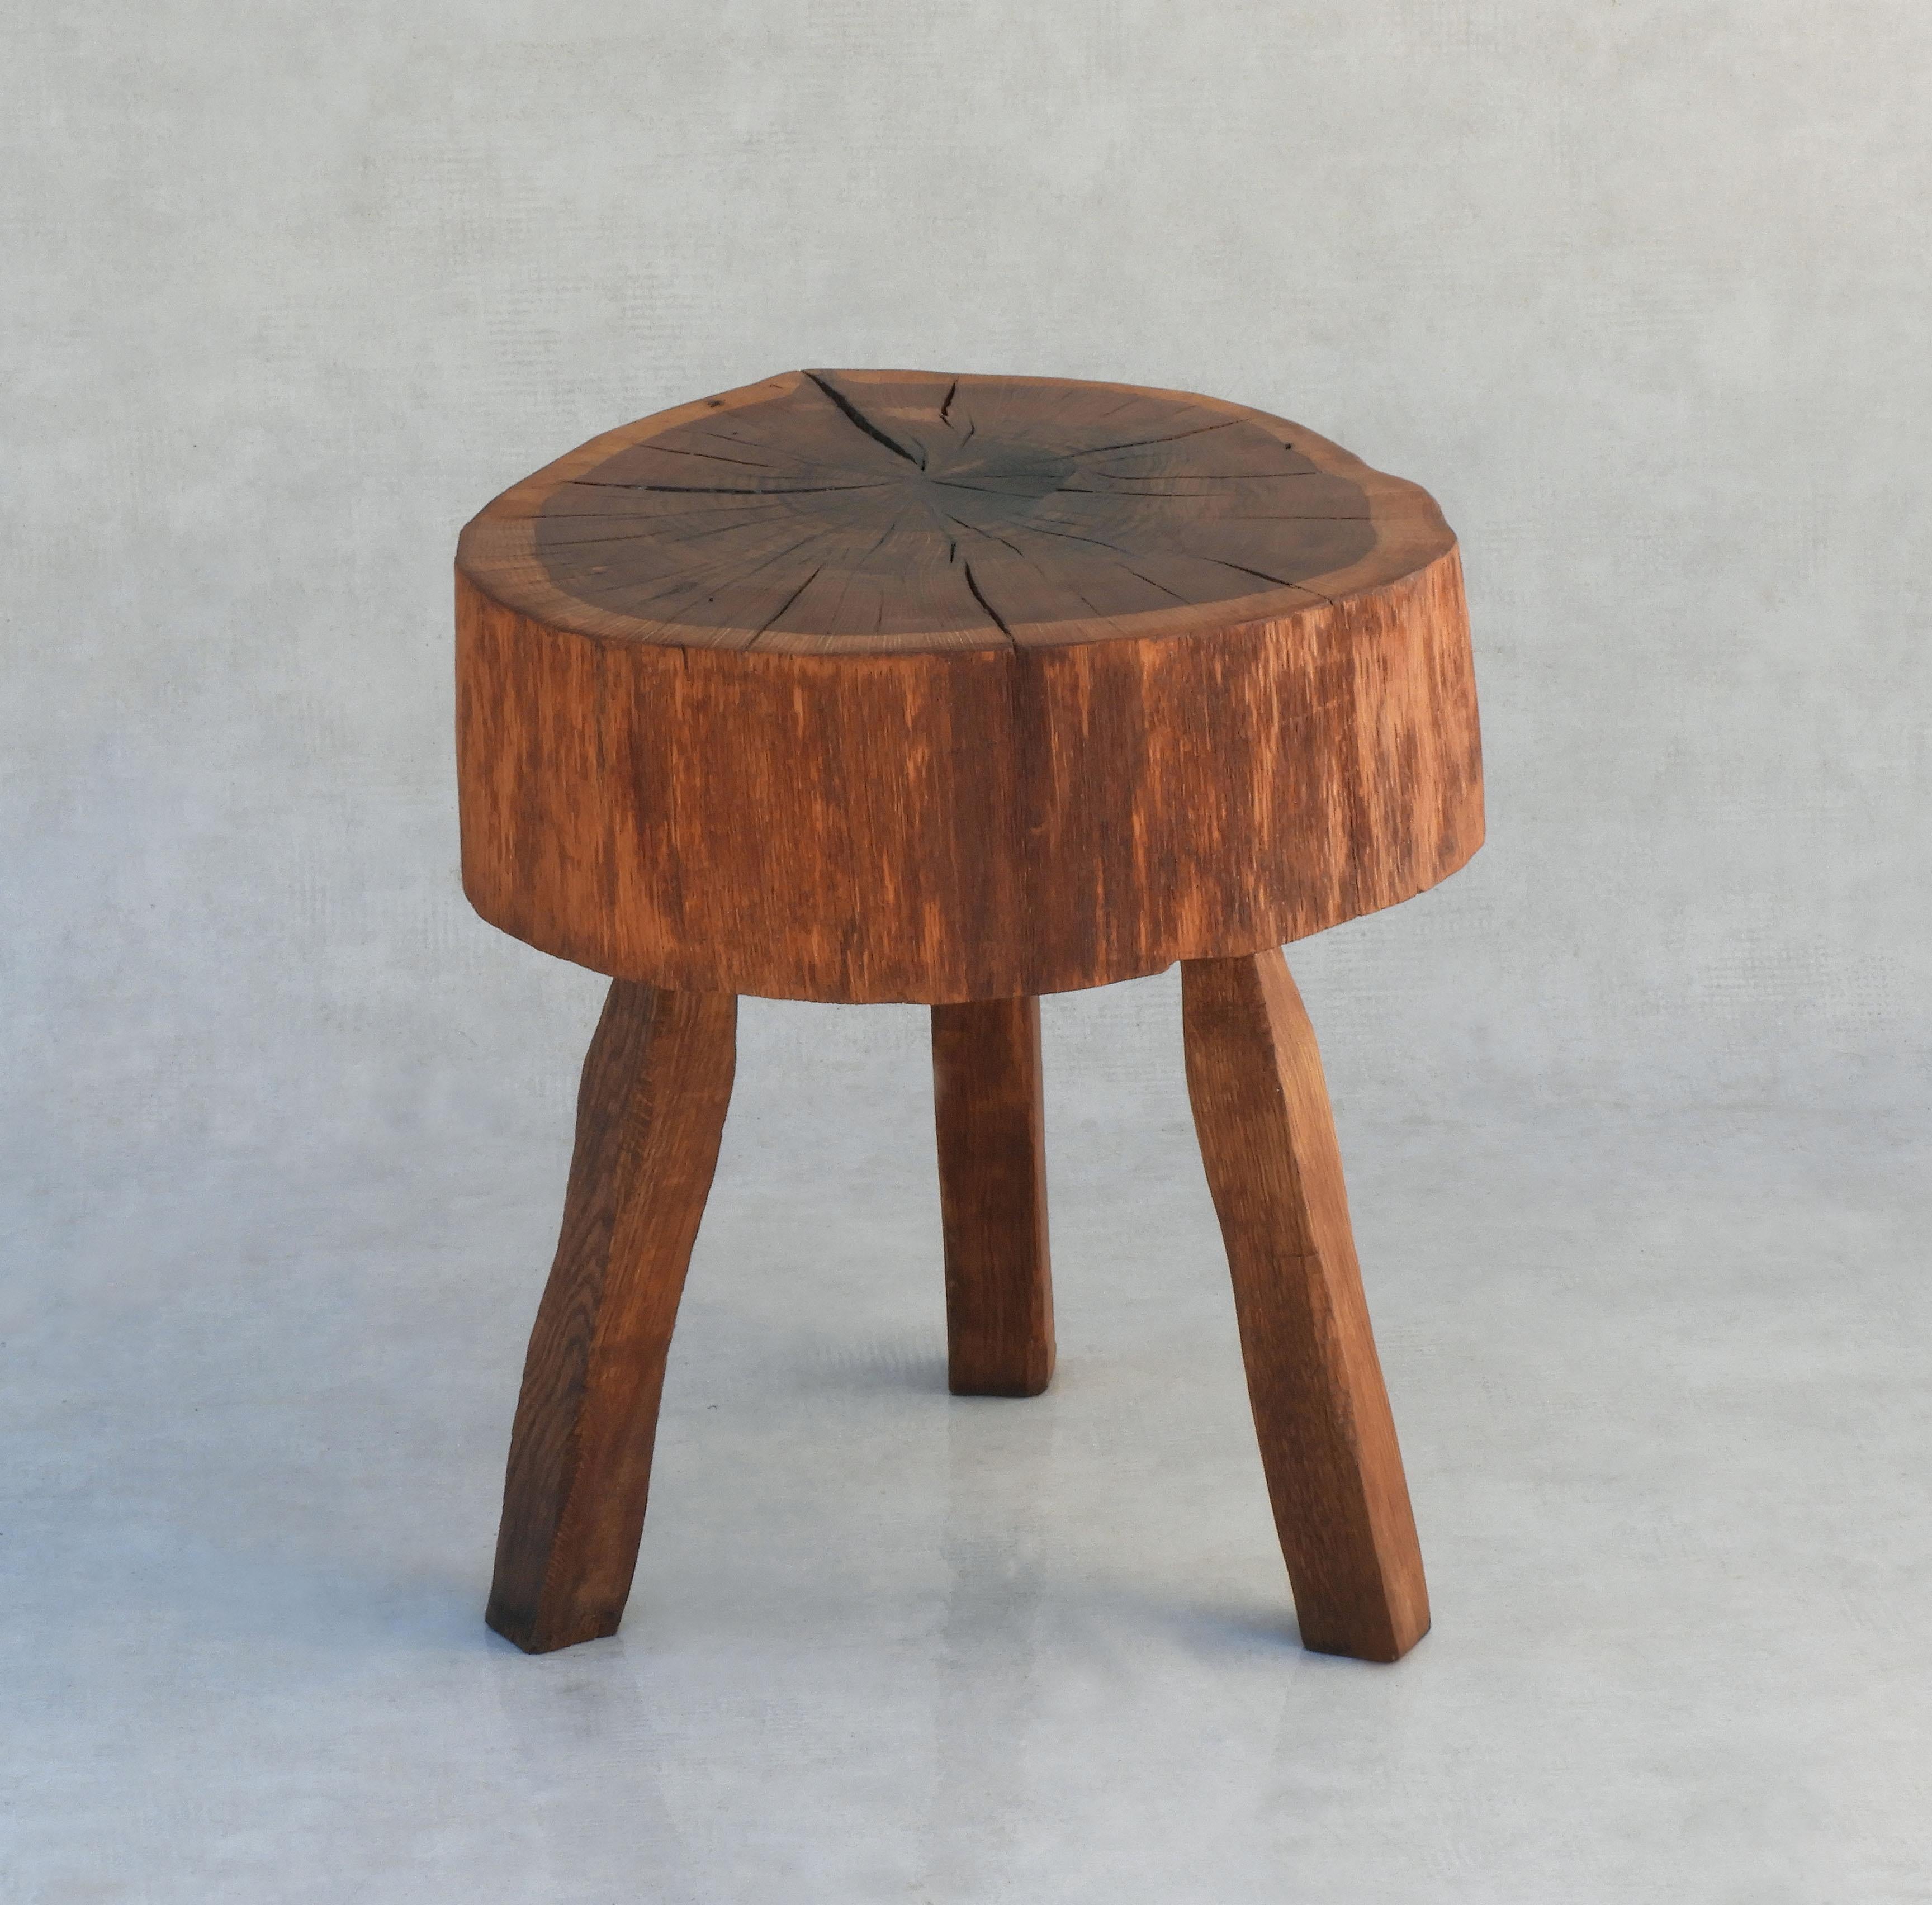 Organic three-legged tree slab table handcrafted in France, circa 1970.  Well made, heavy, solid and sound with no hardware. Live edge, good grain, great colour and patina.  A really nice example of handcrafted French 'Arte Populaire' in great